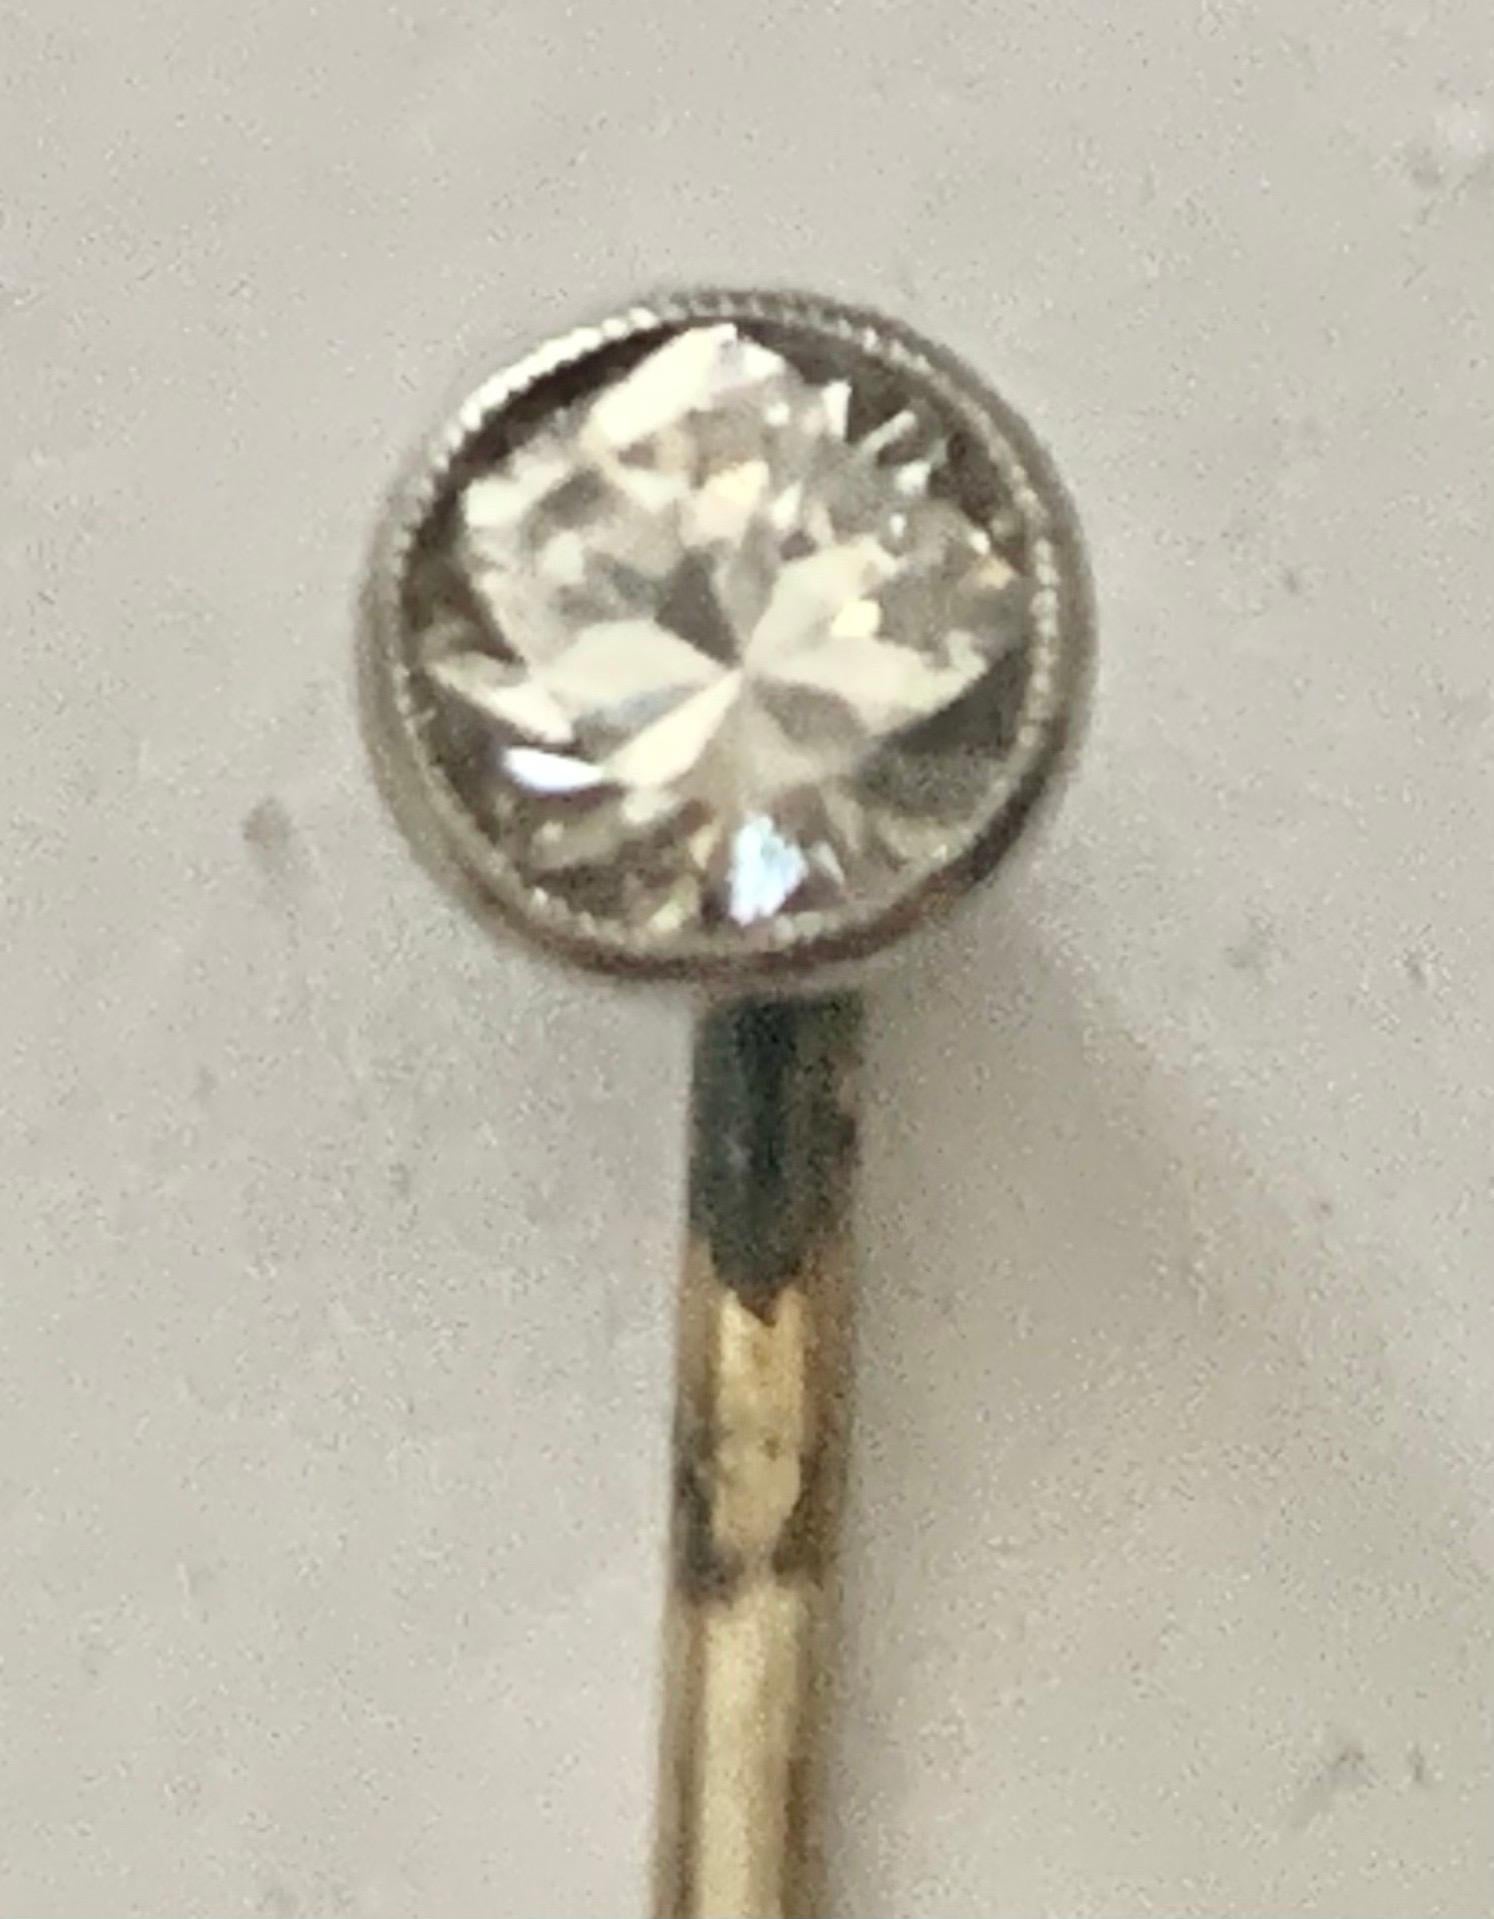 A Circa: Early 20th century. 
This stickpin is made in 18tk white gold and platinum. The head is set with an old brilliant cut diamond weighing approximately 0.45ct. It is set secured with rub over millegrain setting. The diamond is Color: I/J •